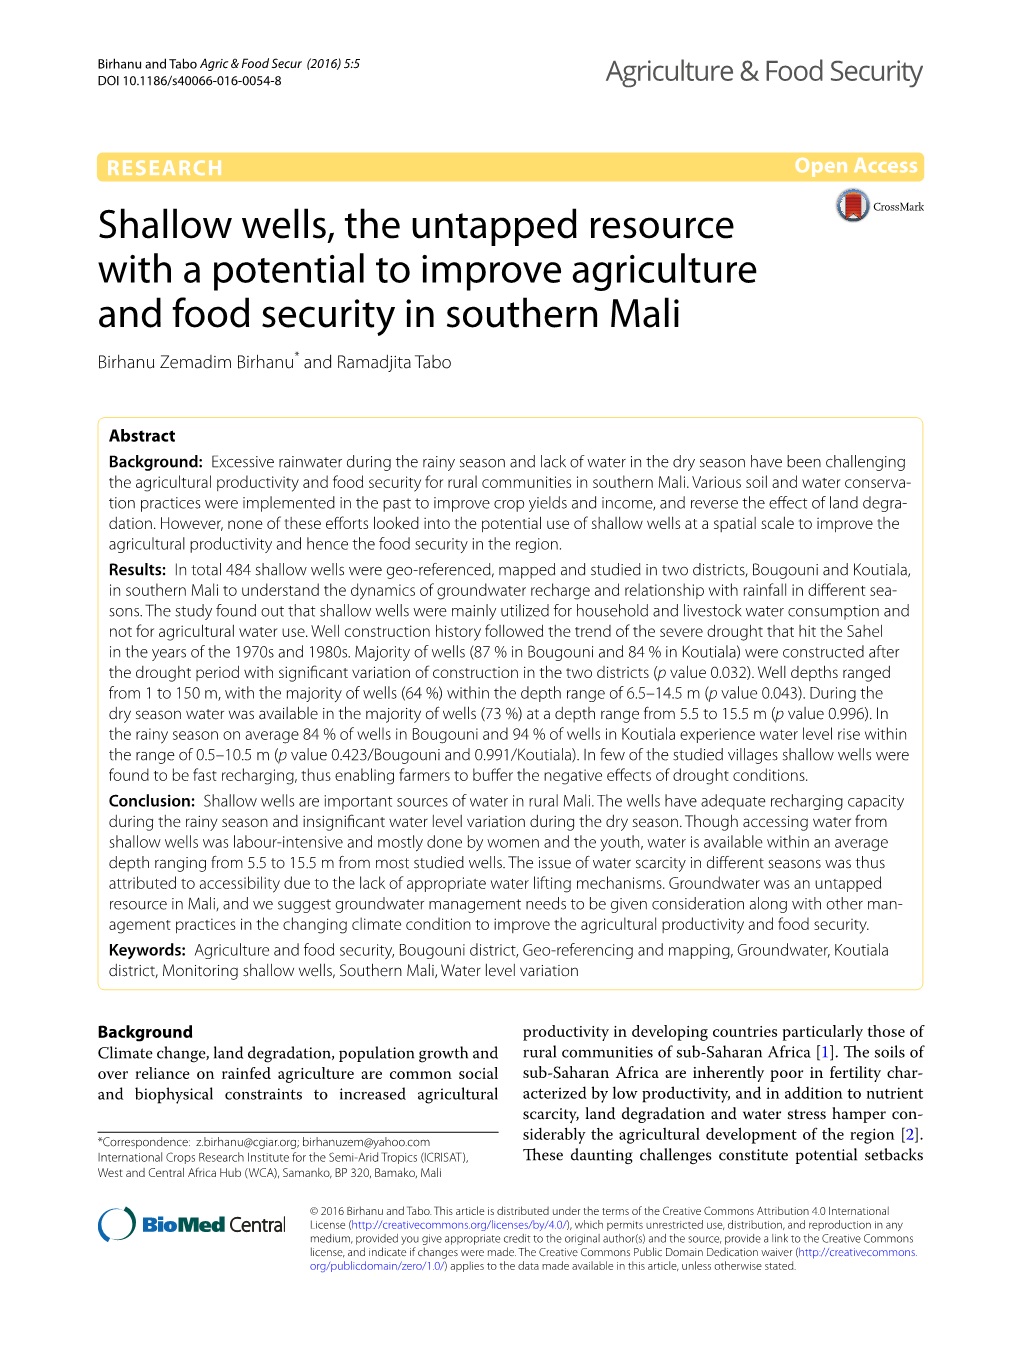 Shallow Wells, the Untapped Resource with a Potential to Improve Agriculture and Food Security in Southern Mali Birhanu Zemadim Birhanu* and Ramadjita Tabo